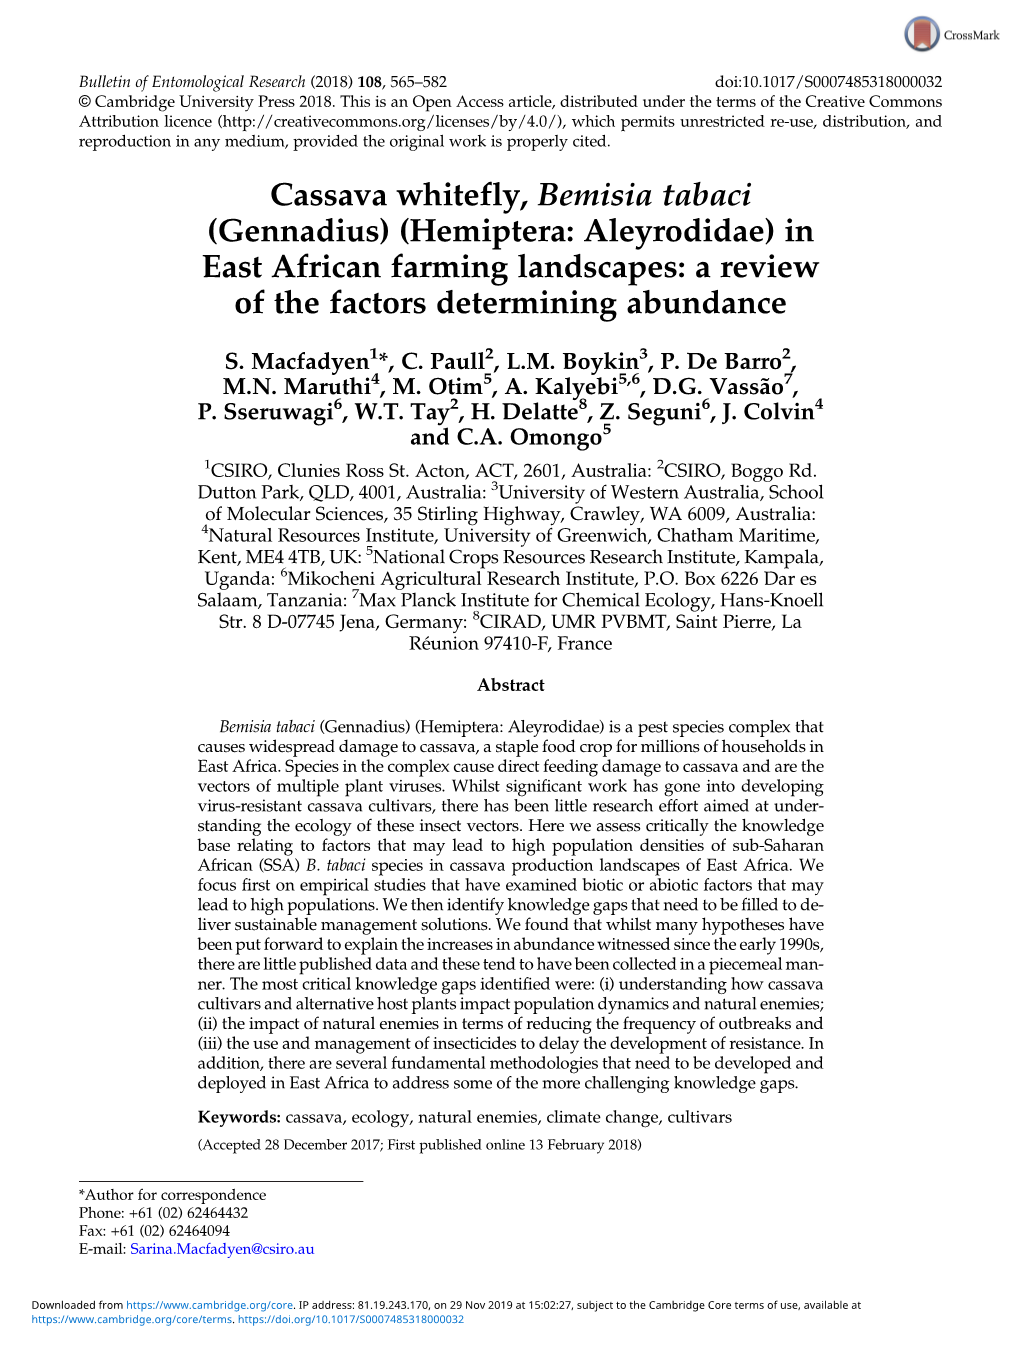 Cassava Whitefly, Bemisia Tabaci (Gennadius) (Hemiptera: Aleyrodidae) in East African Farming Landscapes: a Review of the Factors Determining Abundance